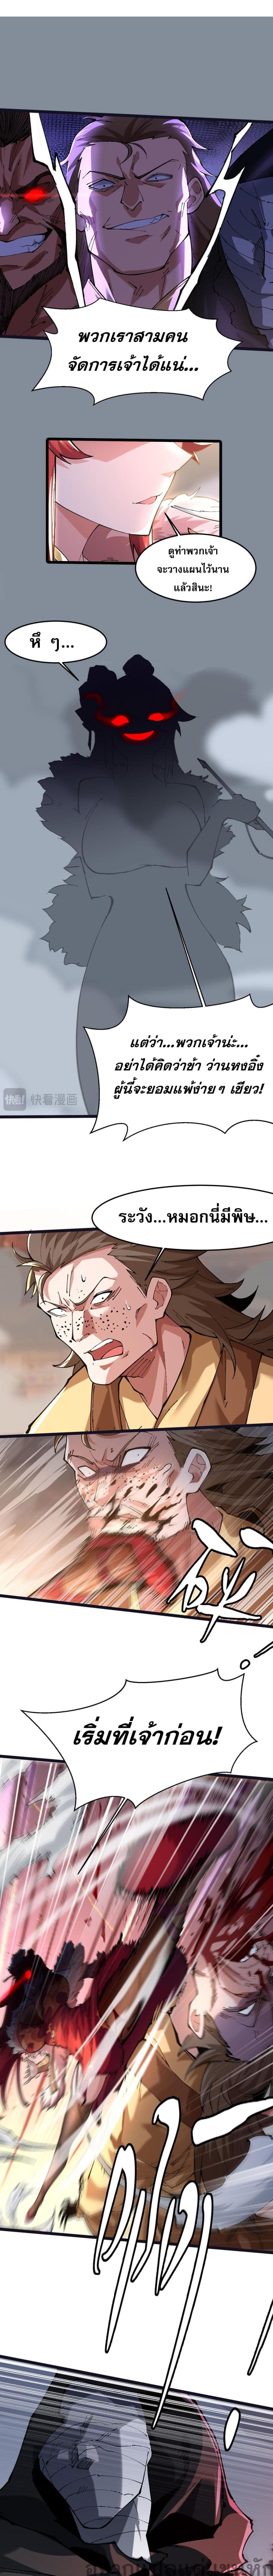 I Have Hundreds of Millions of Years of Cultivation ข้ามีพลังบำเพ็ญหนึ่งล้านปี 5-5